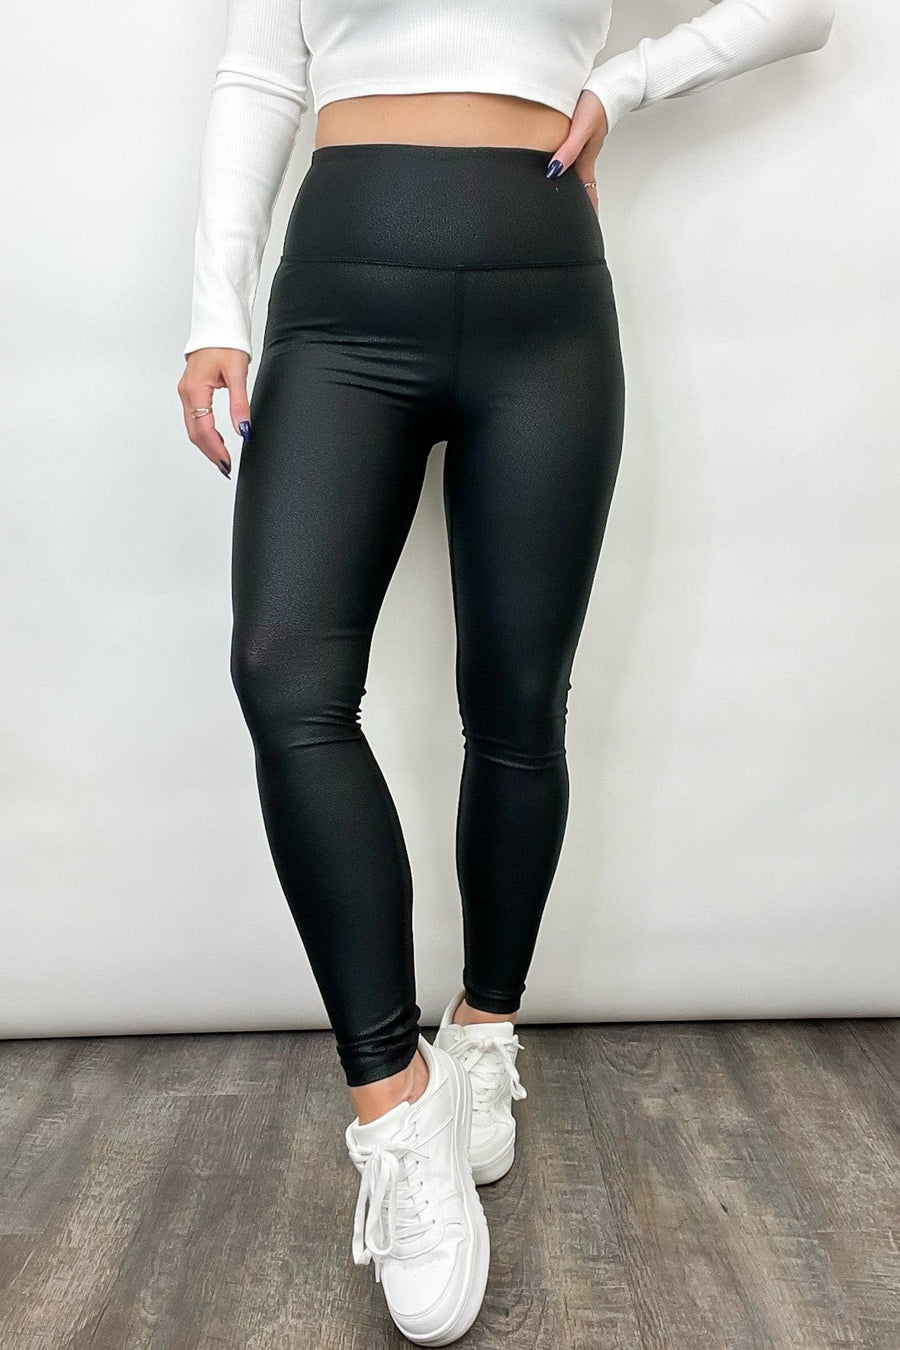 S / Black Sleek and Chic Pebbled Faux Leather Leggings - BACK IN STOCK - Madison and Mallory